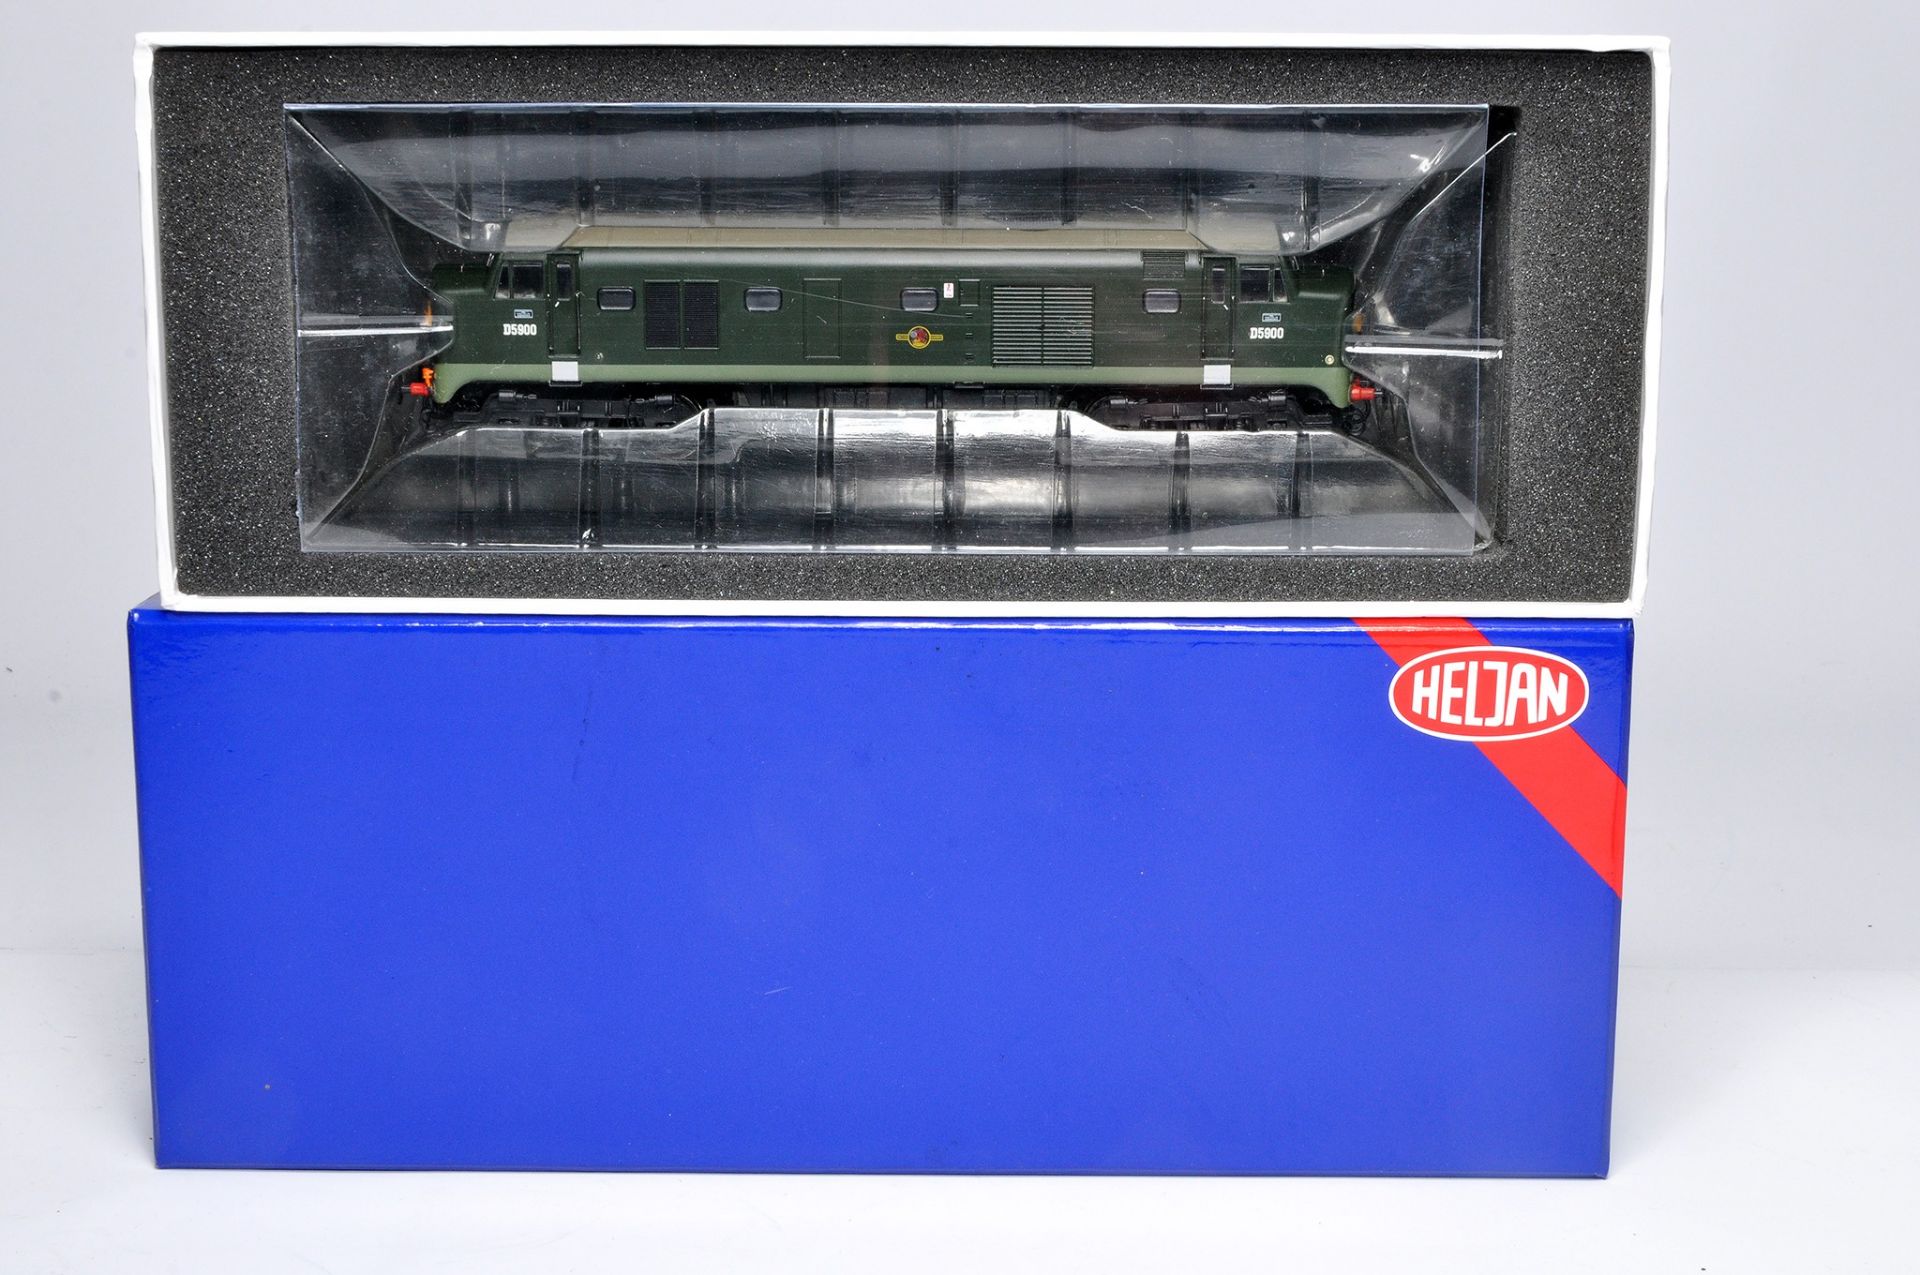 Heljan Model Railway comprising locomotive issue No. 2300 Class 23 D5900. Looks to be without